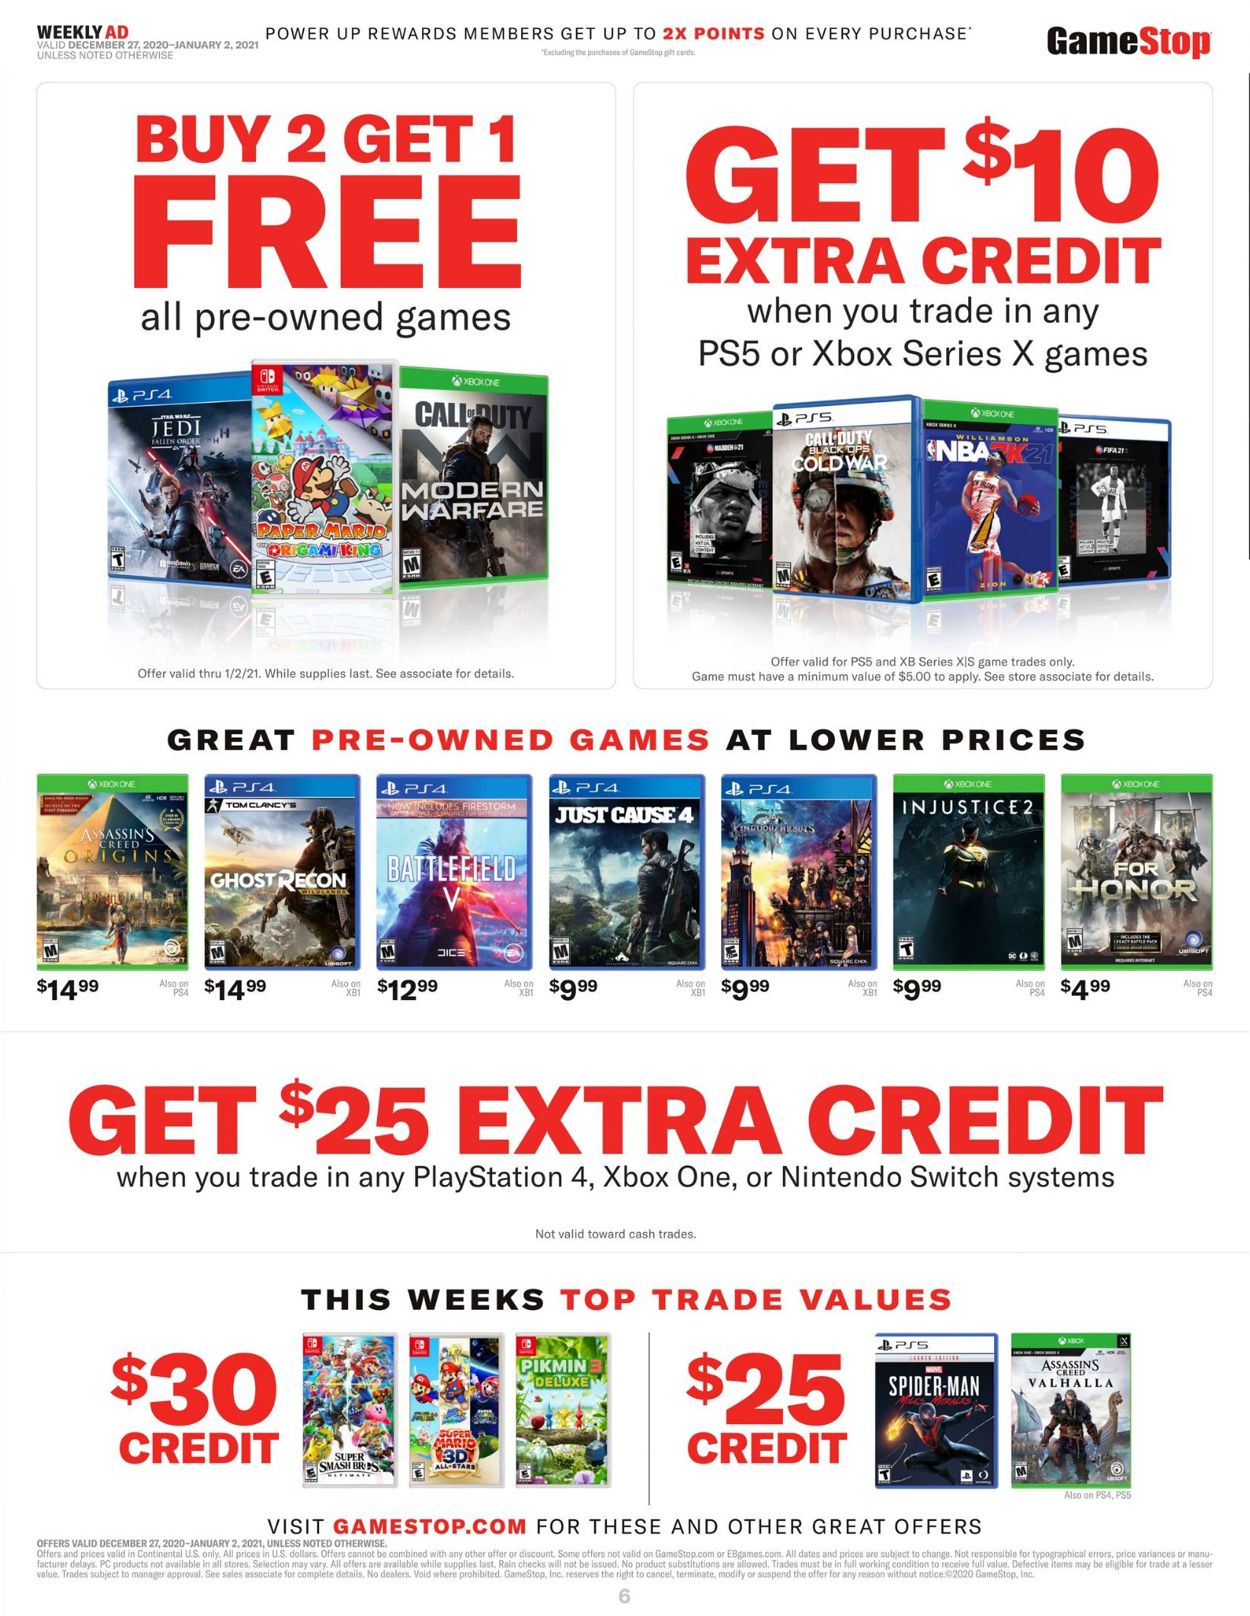 Game Stop Ad from 12/27/2020